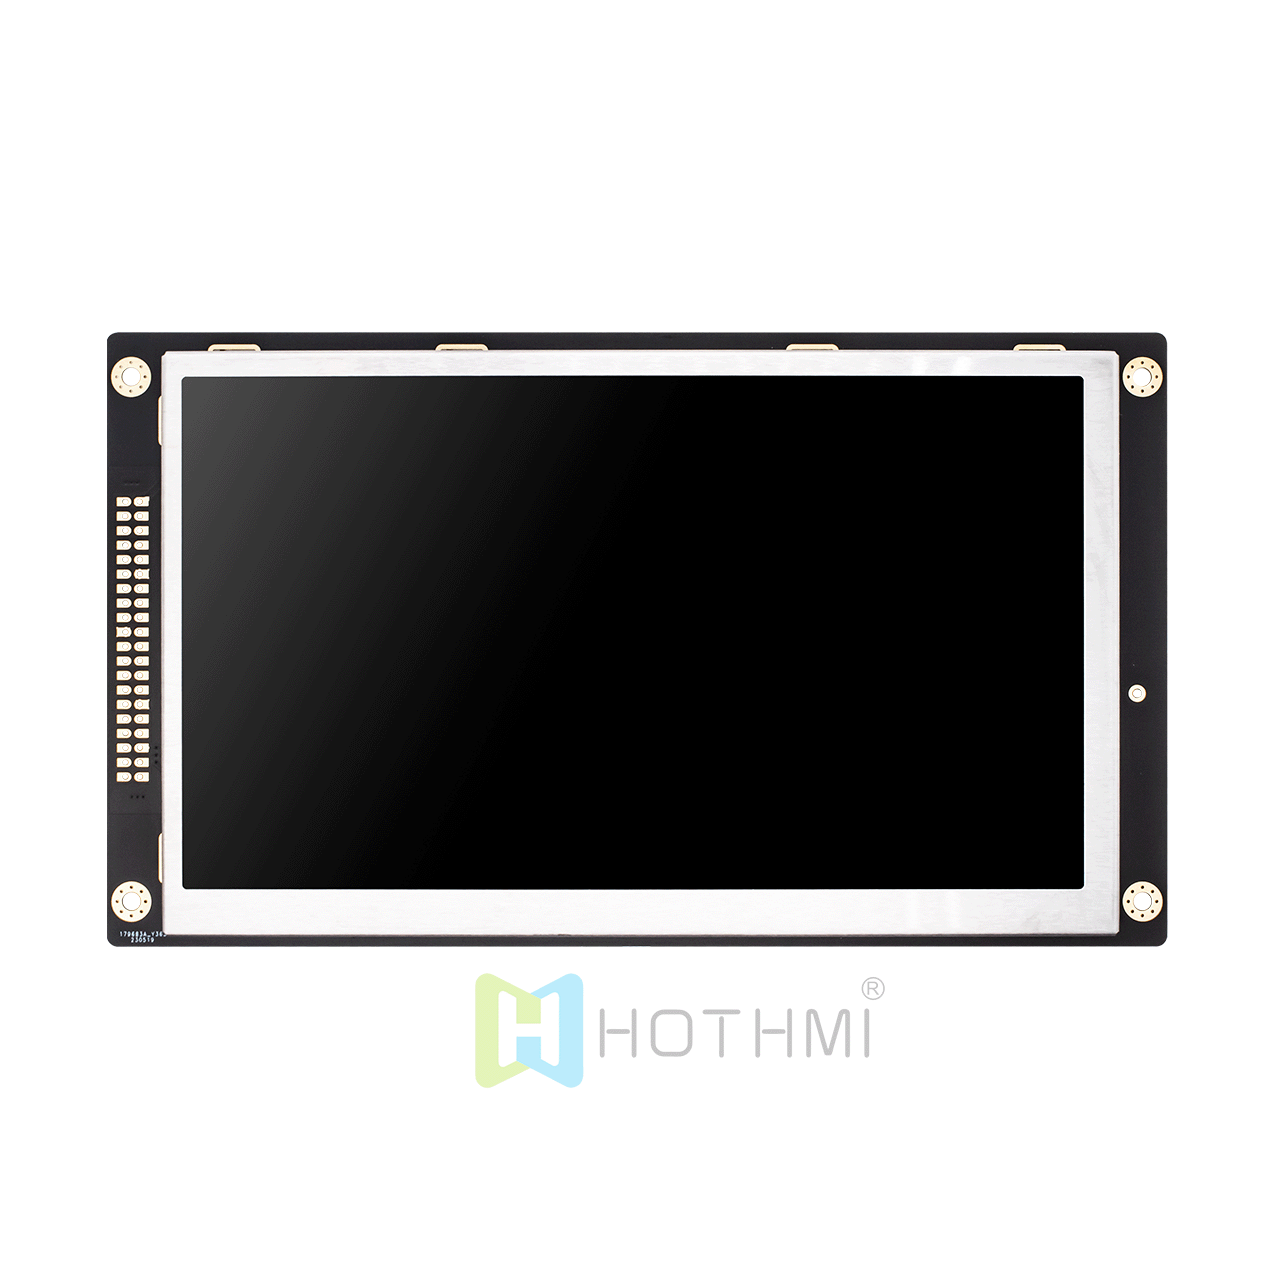 7.0inch TFT LCD Display Module//1024x600 resolution/wide temperature/IPS full viewing angle/sunlight viewable/optional capacitive touch/STM32/RK